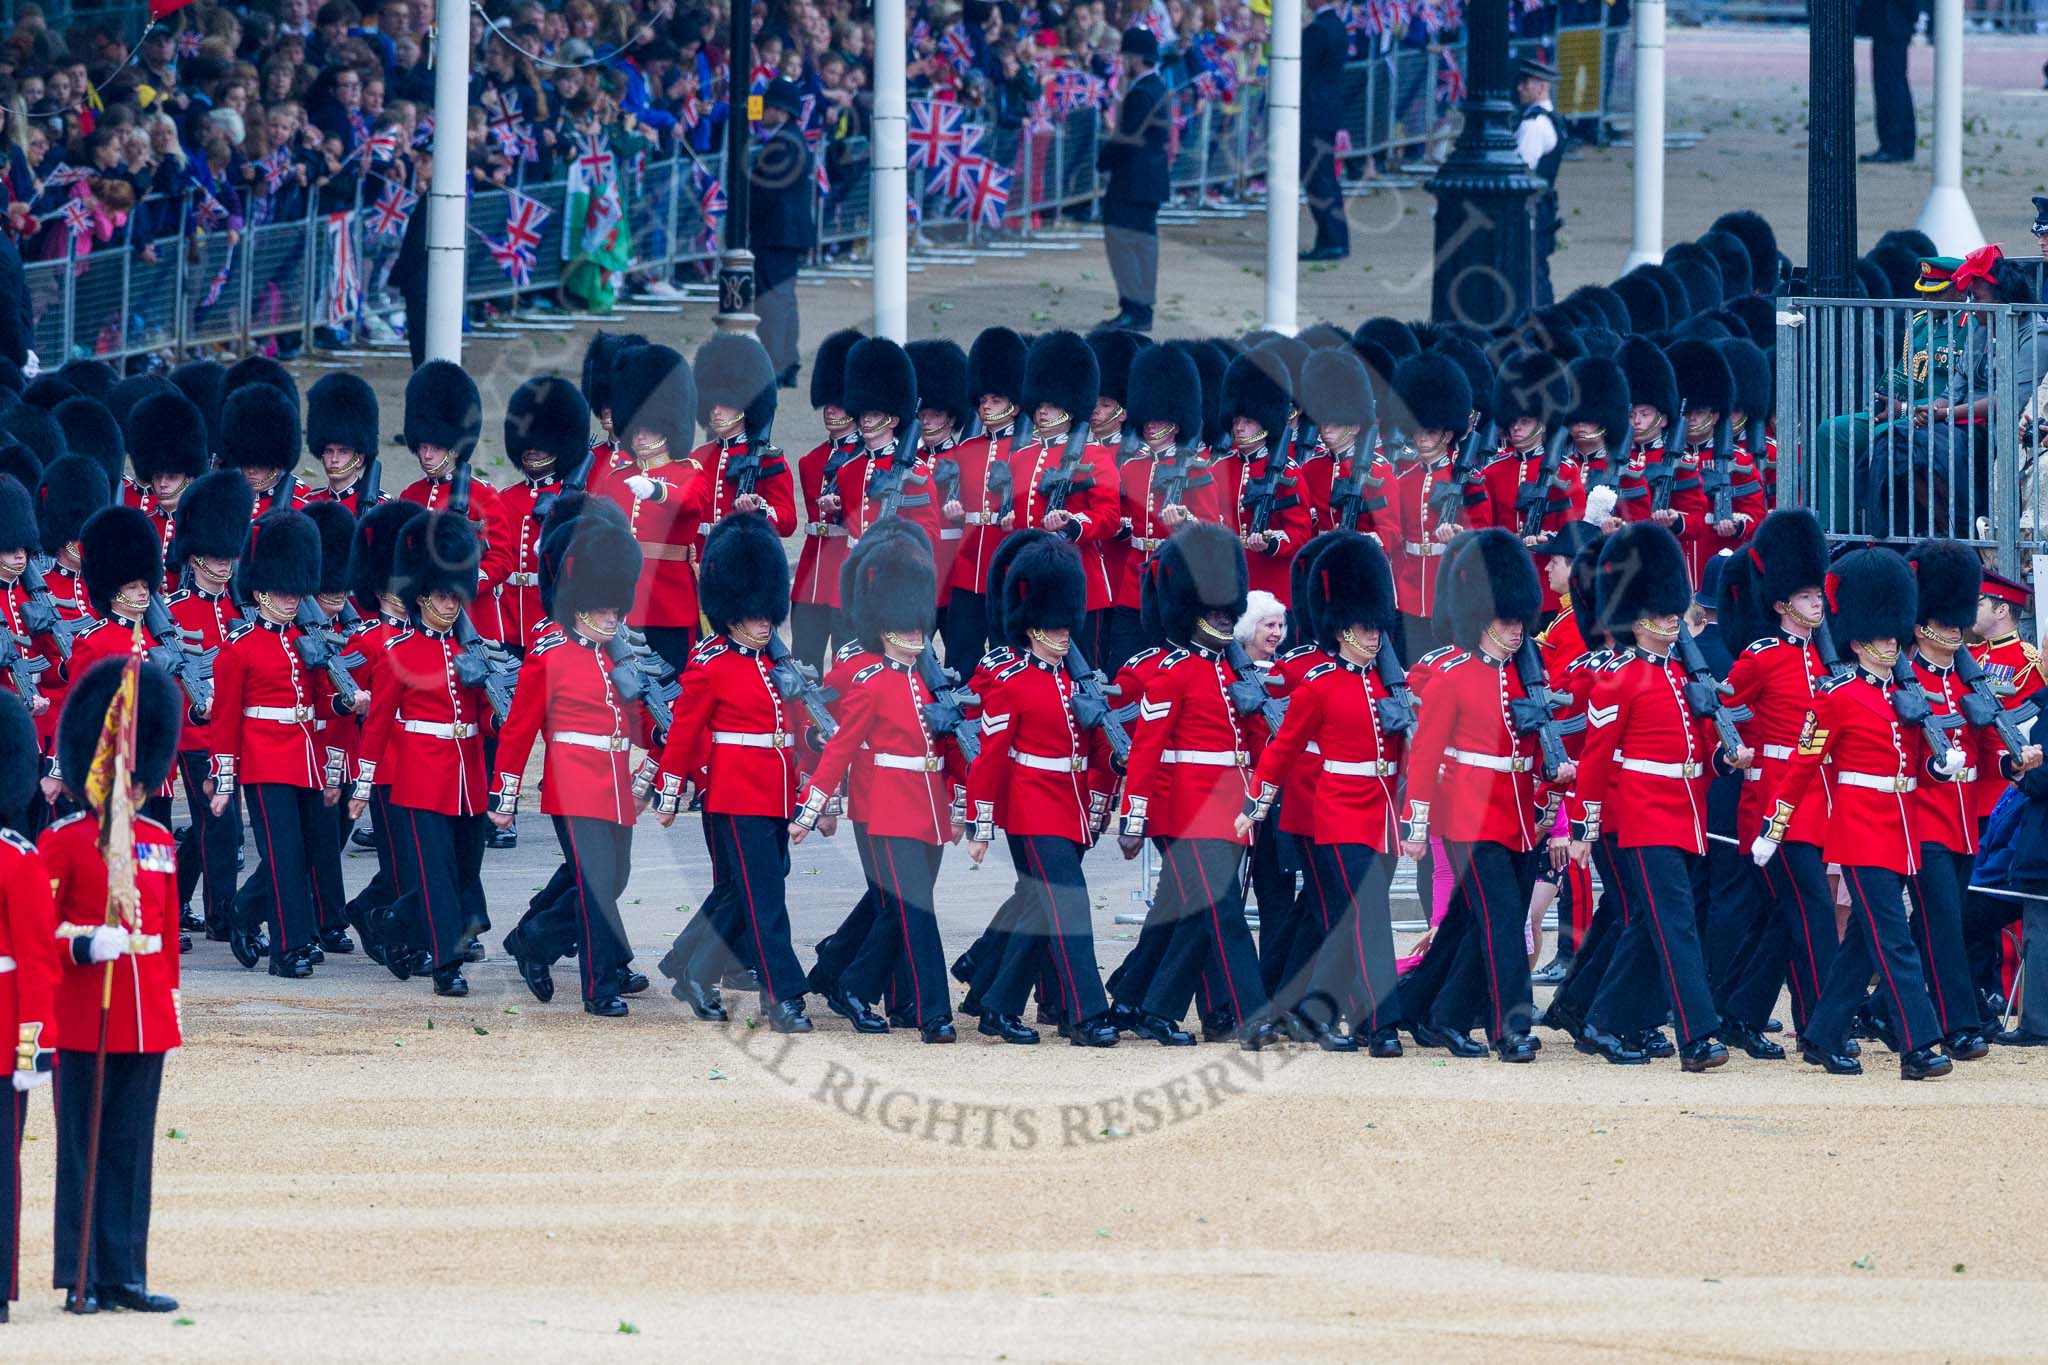 Trooping the Colour 2015. Image #78, 13 June 2015 10:24 Horse Guards Parade, London, UK